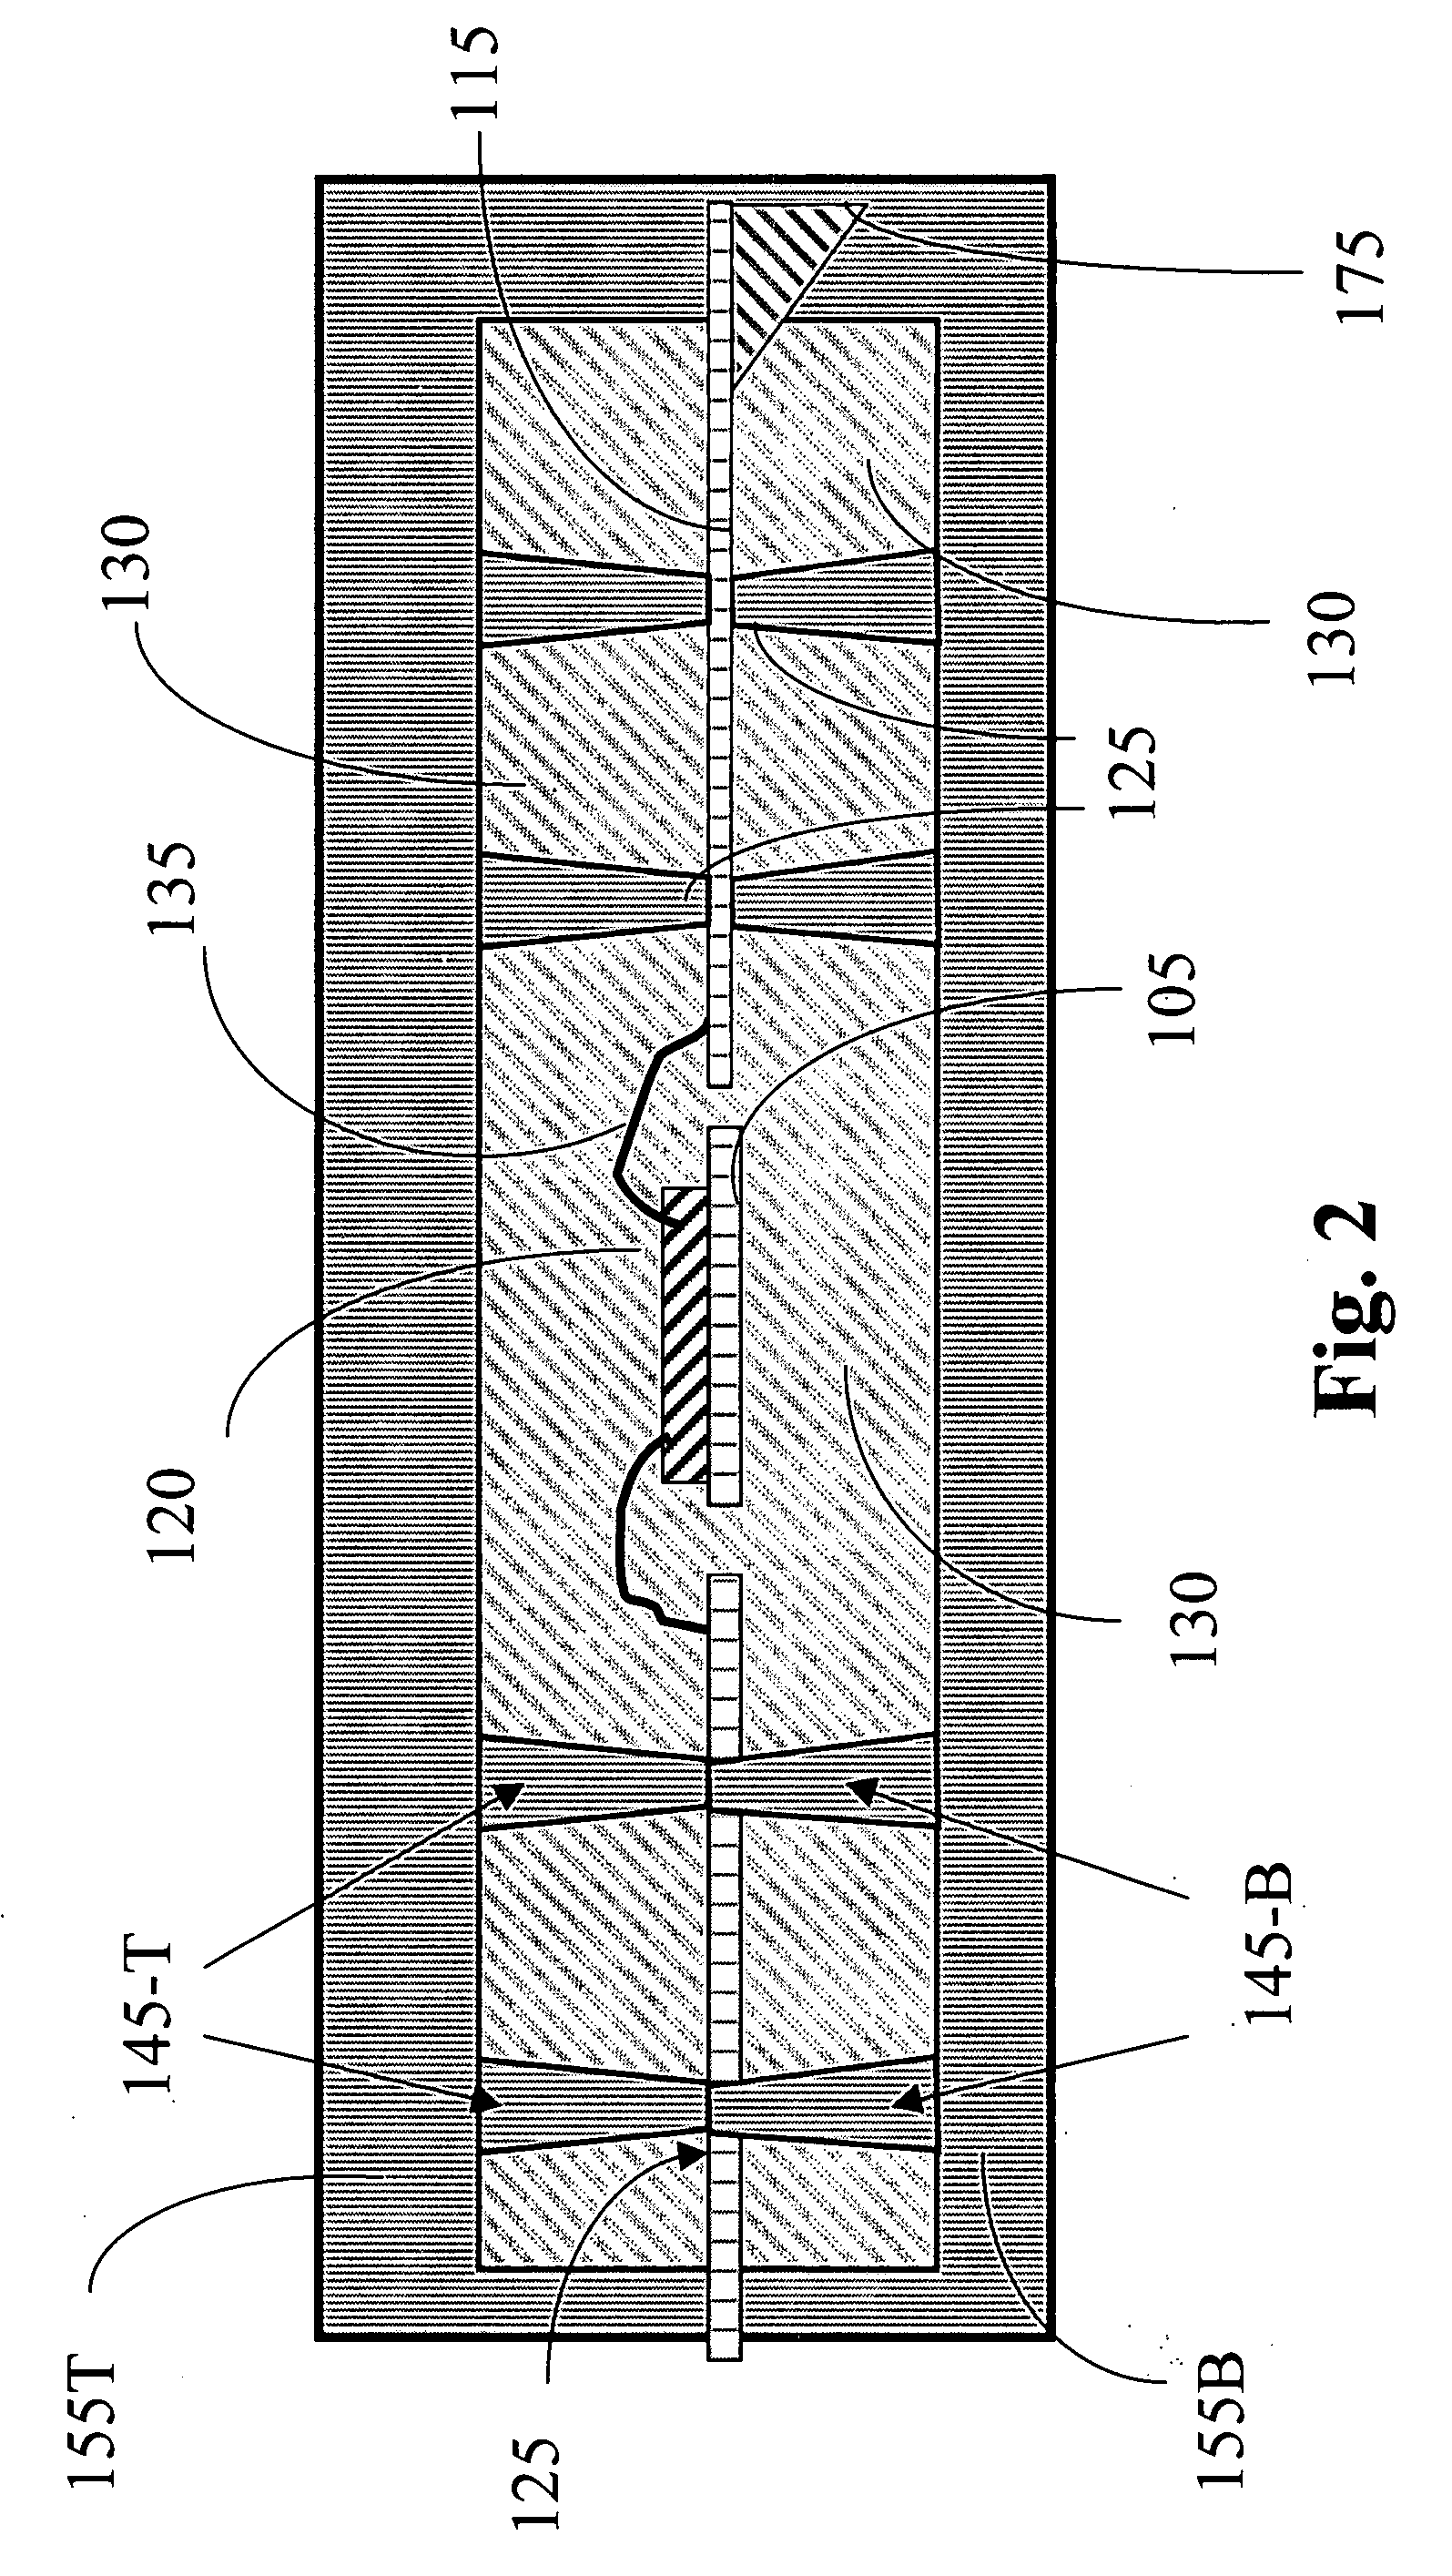 Package with solder-filled via holes in molding layers